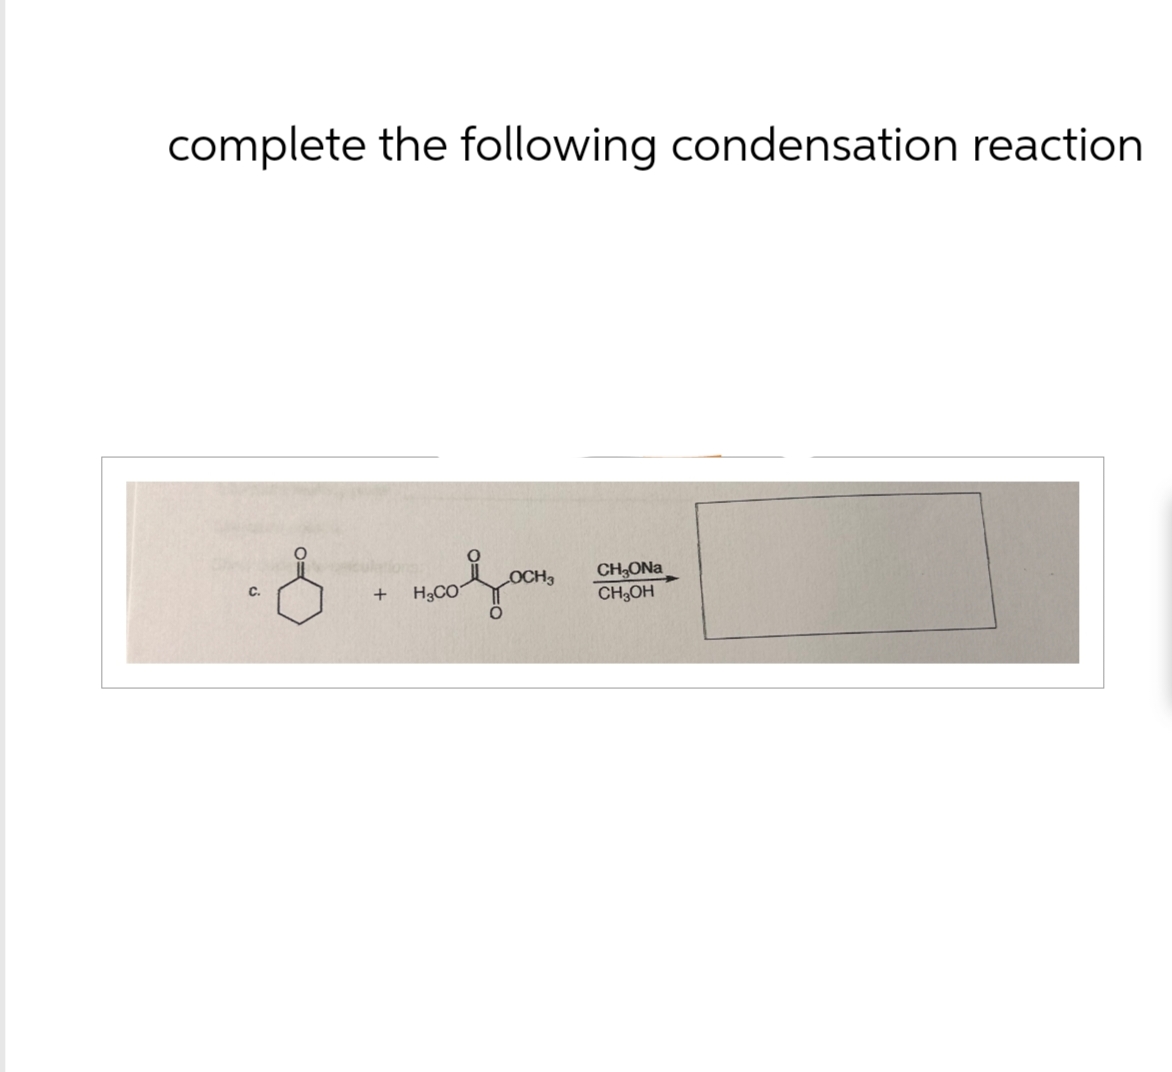 complete the following condensation reaction
C.
S+
LOCH3
H3CO
CH₂ONa
CH3OH